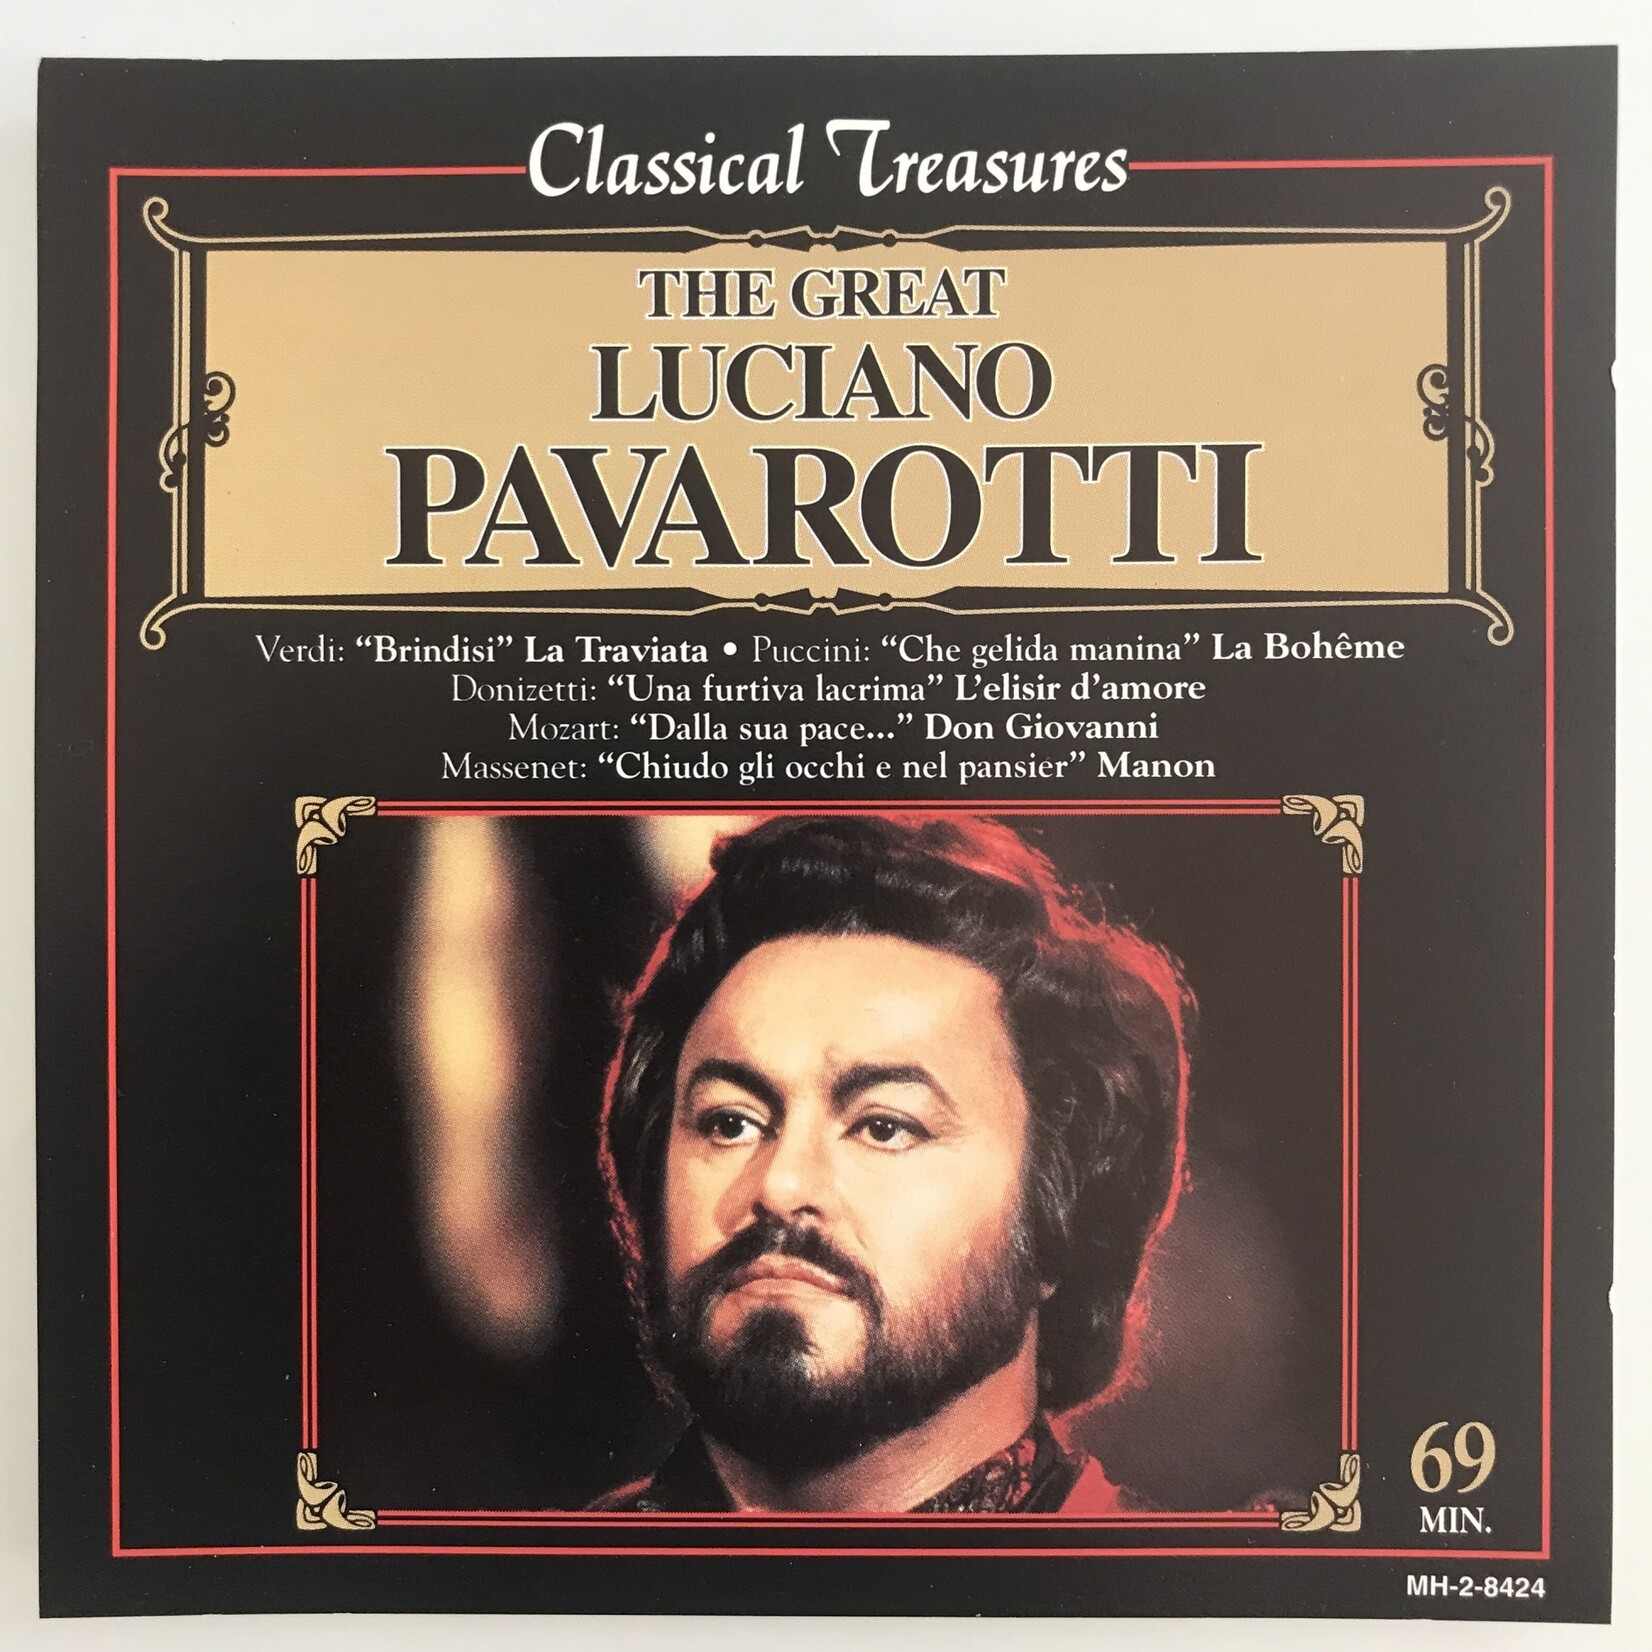 Luciano Pavarotti - The Great Luciano Pavaotti - CD (USED)